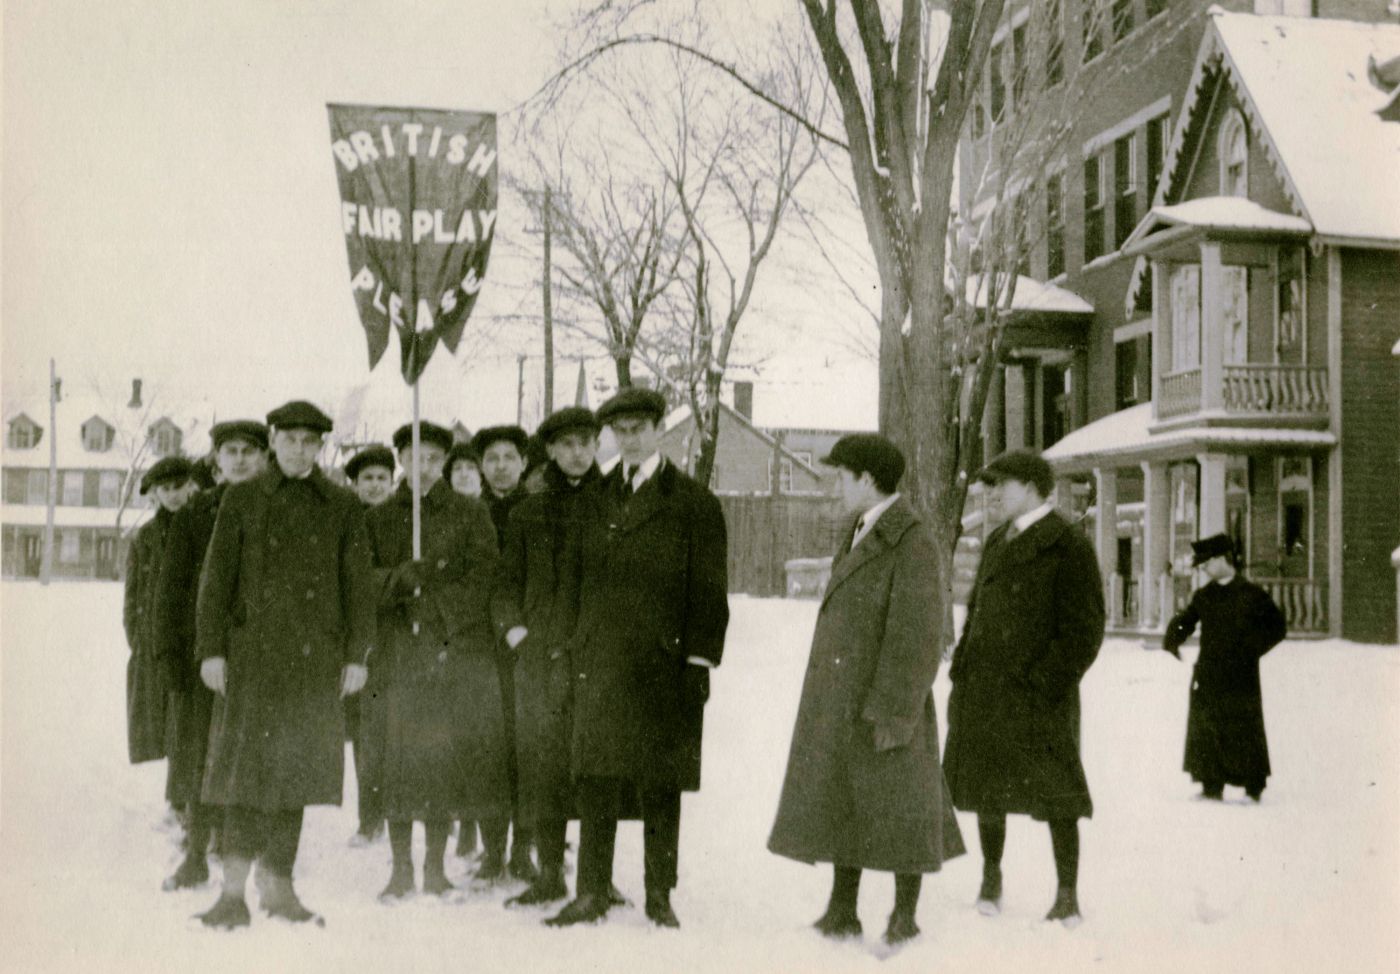 A small group of people dressed in winter clothing stand outside, in the snow in an open space surrounded by brick buildings and trees. One of the group members holds a flag with English text reading “BRITISH FAIR PLAY PLEASE“ in capital letters.